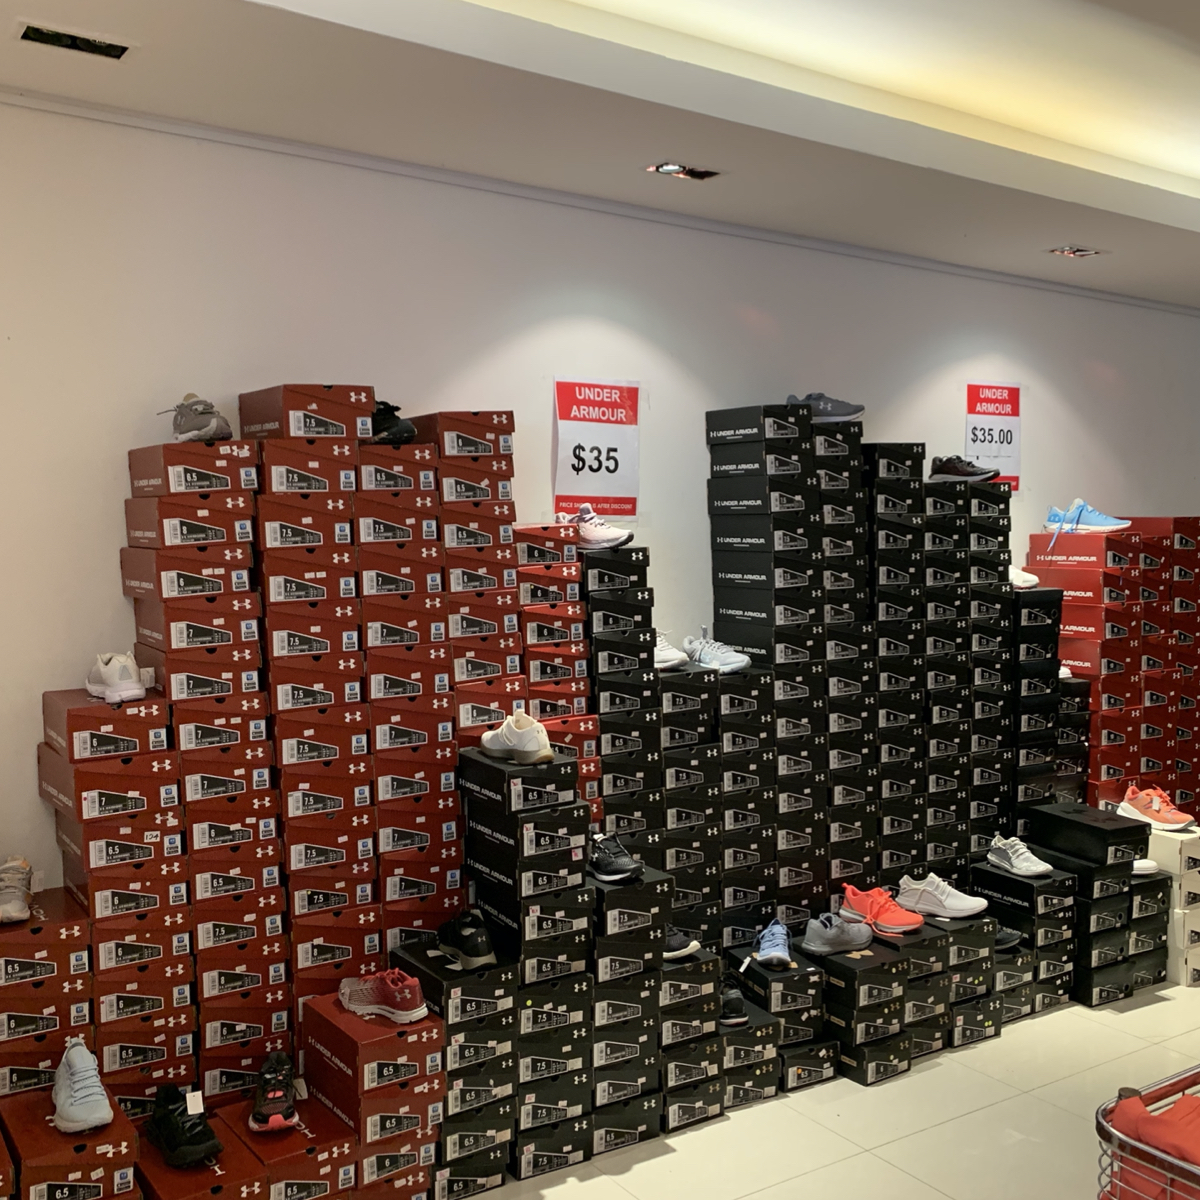 LINK Outlet Sale has up to 80% off branded shoes, bags, accessories & more (30 Jul – 2 Aug 2020) - 12